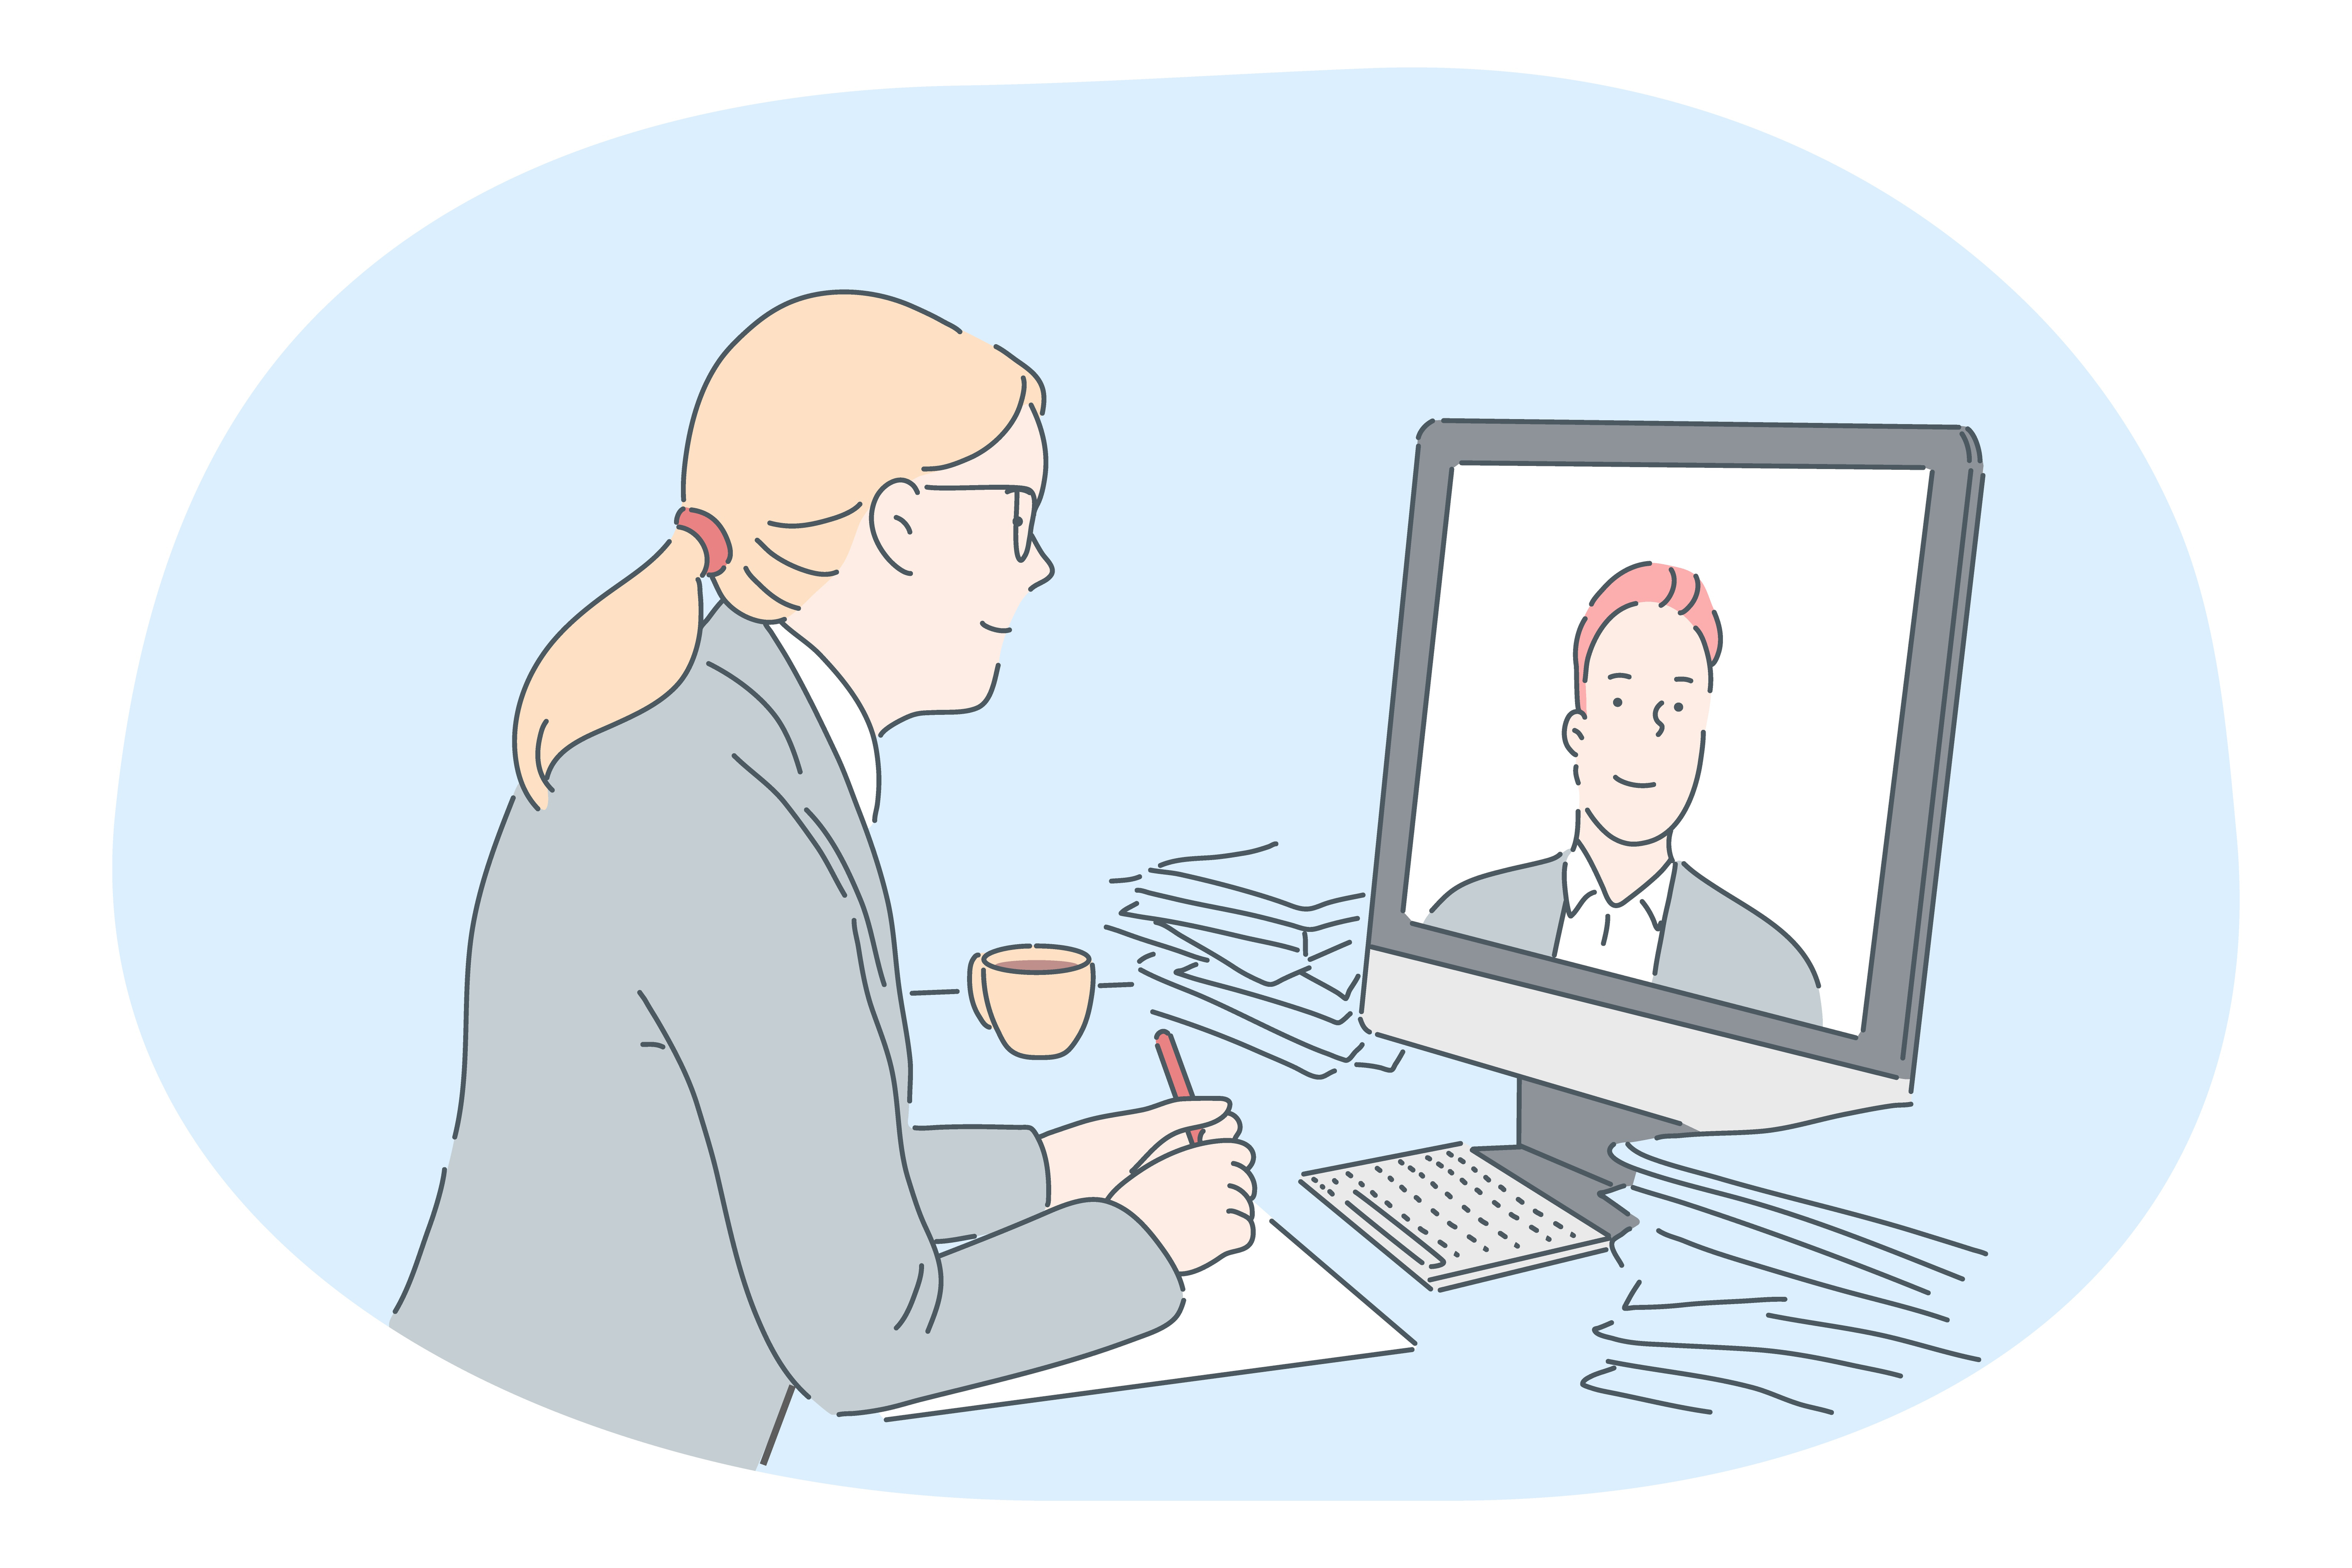 Online meeting, business communication, distant work, teleconference concept. Young business lady cartoon character sitting and communicating with colleague online during video call online conference. Online meeting, business communication, distant work, teleconference concept